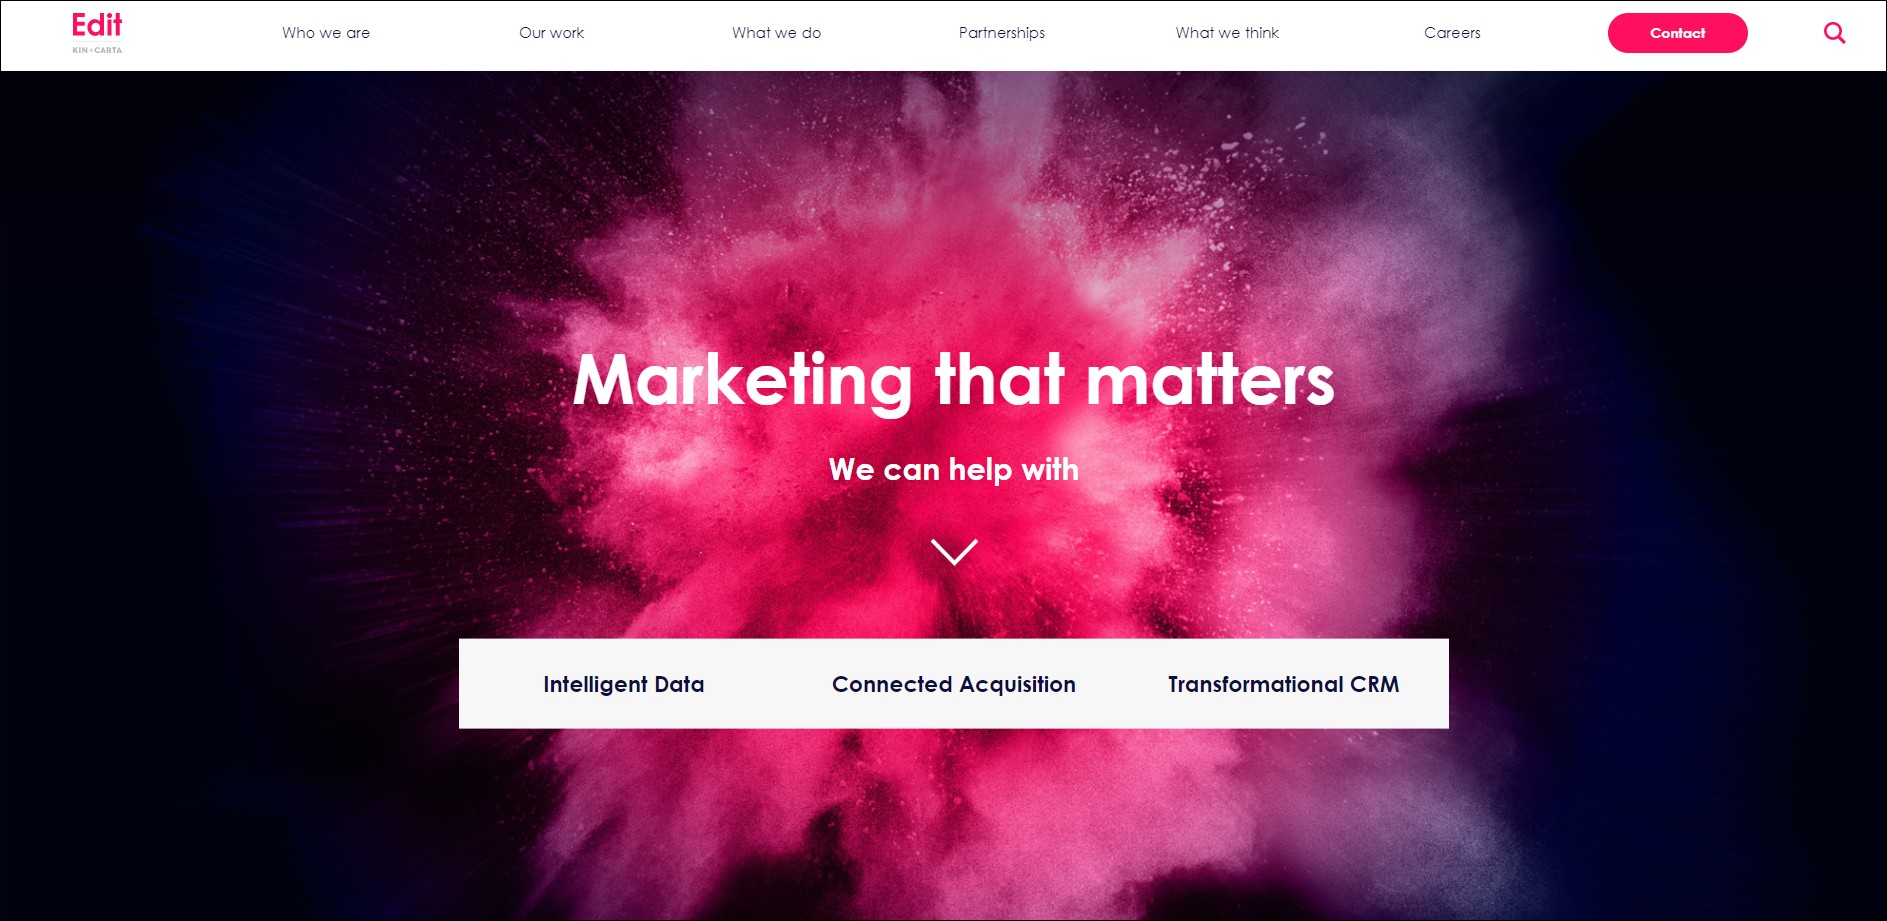 Content Marketing Agencies in Europe